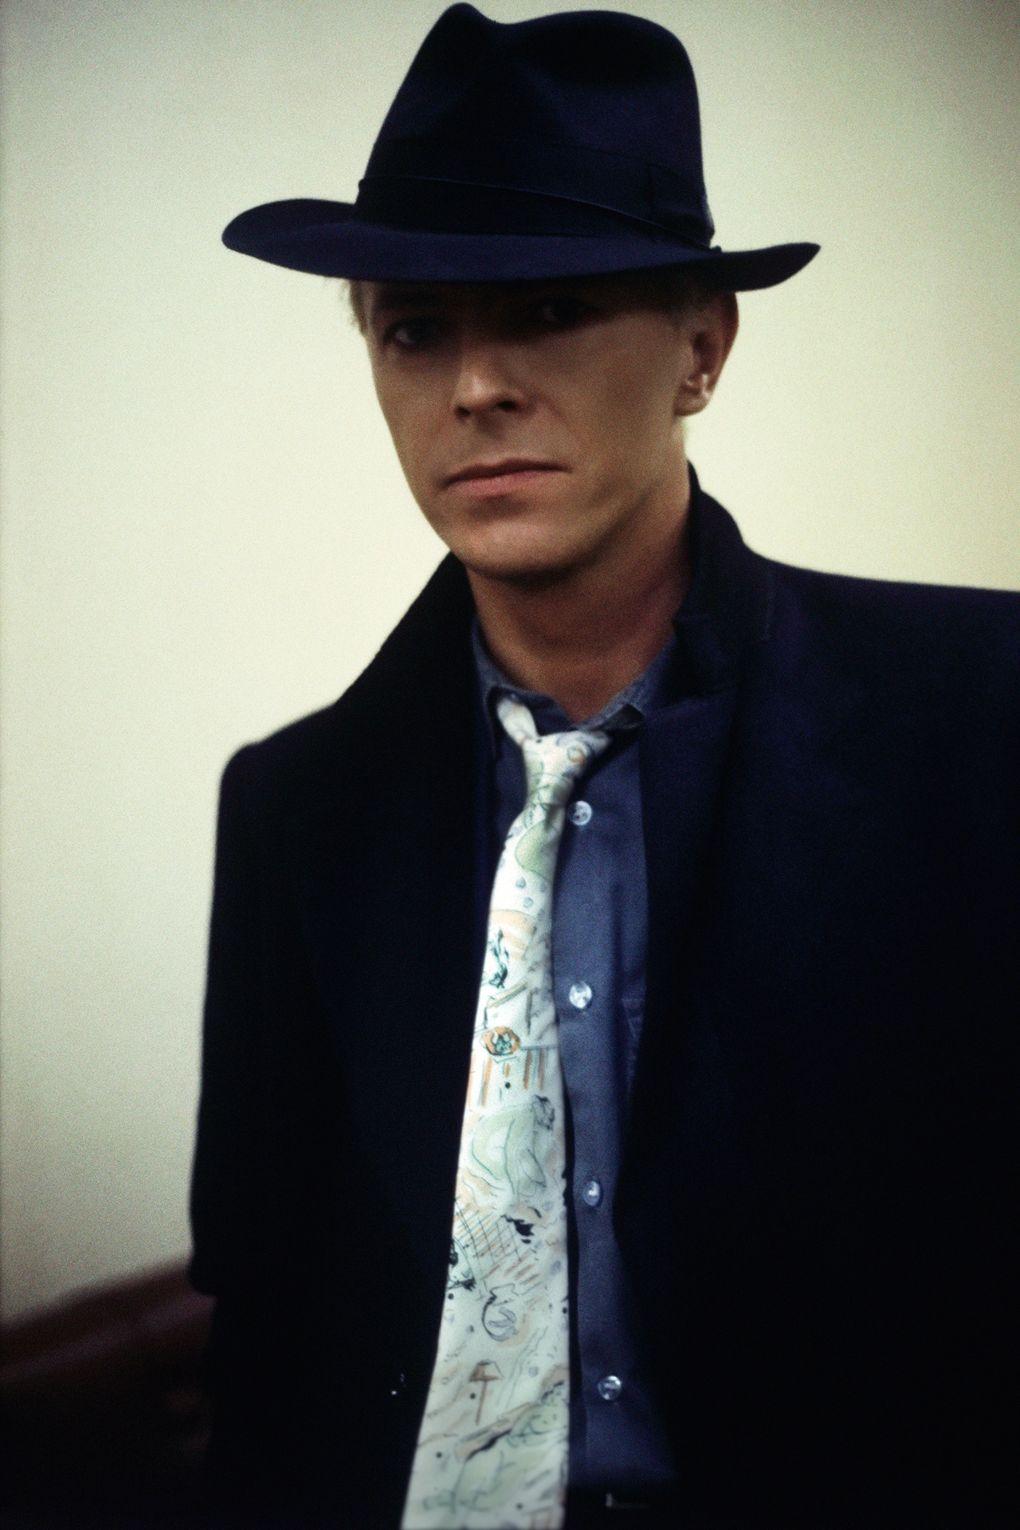 David Bowie behind the scenes: there are unknown photo singer from the legendary tour Im-bowie6